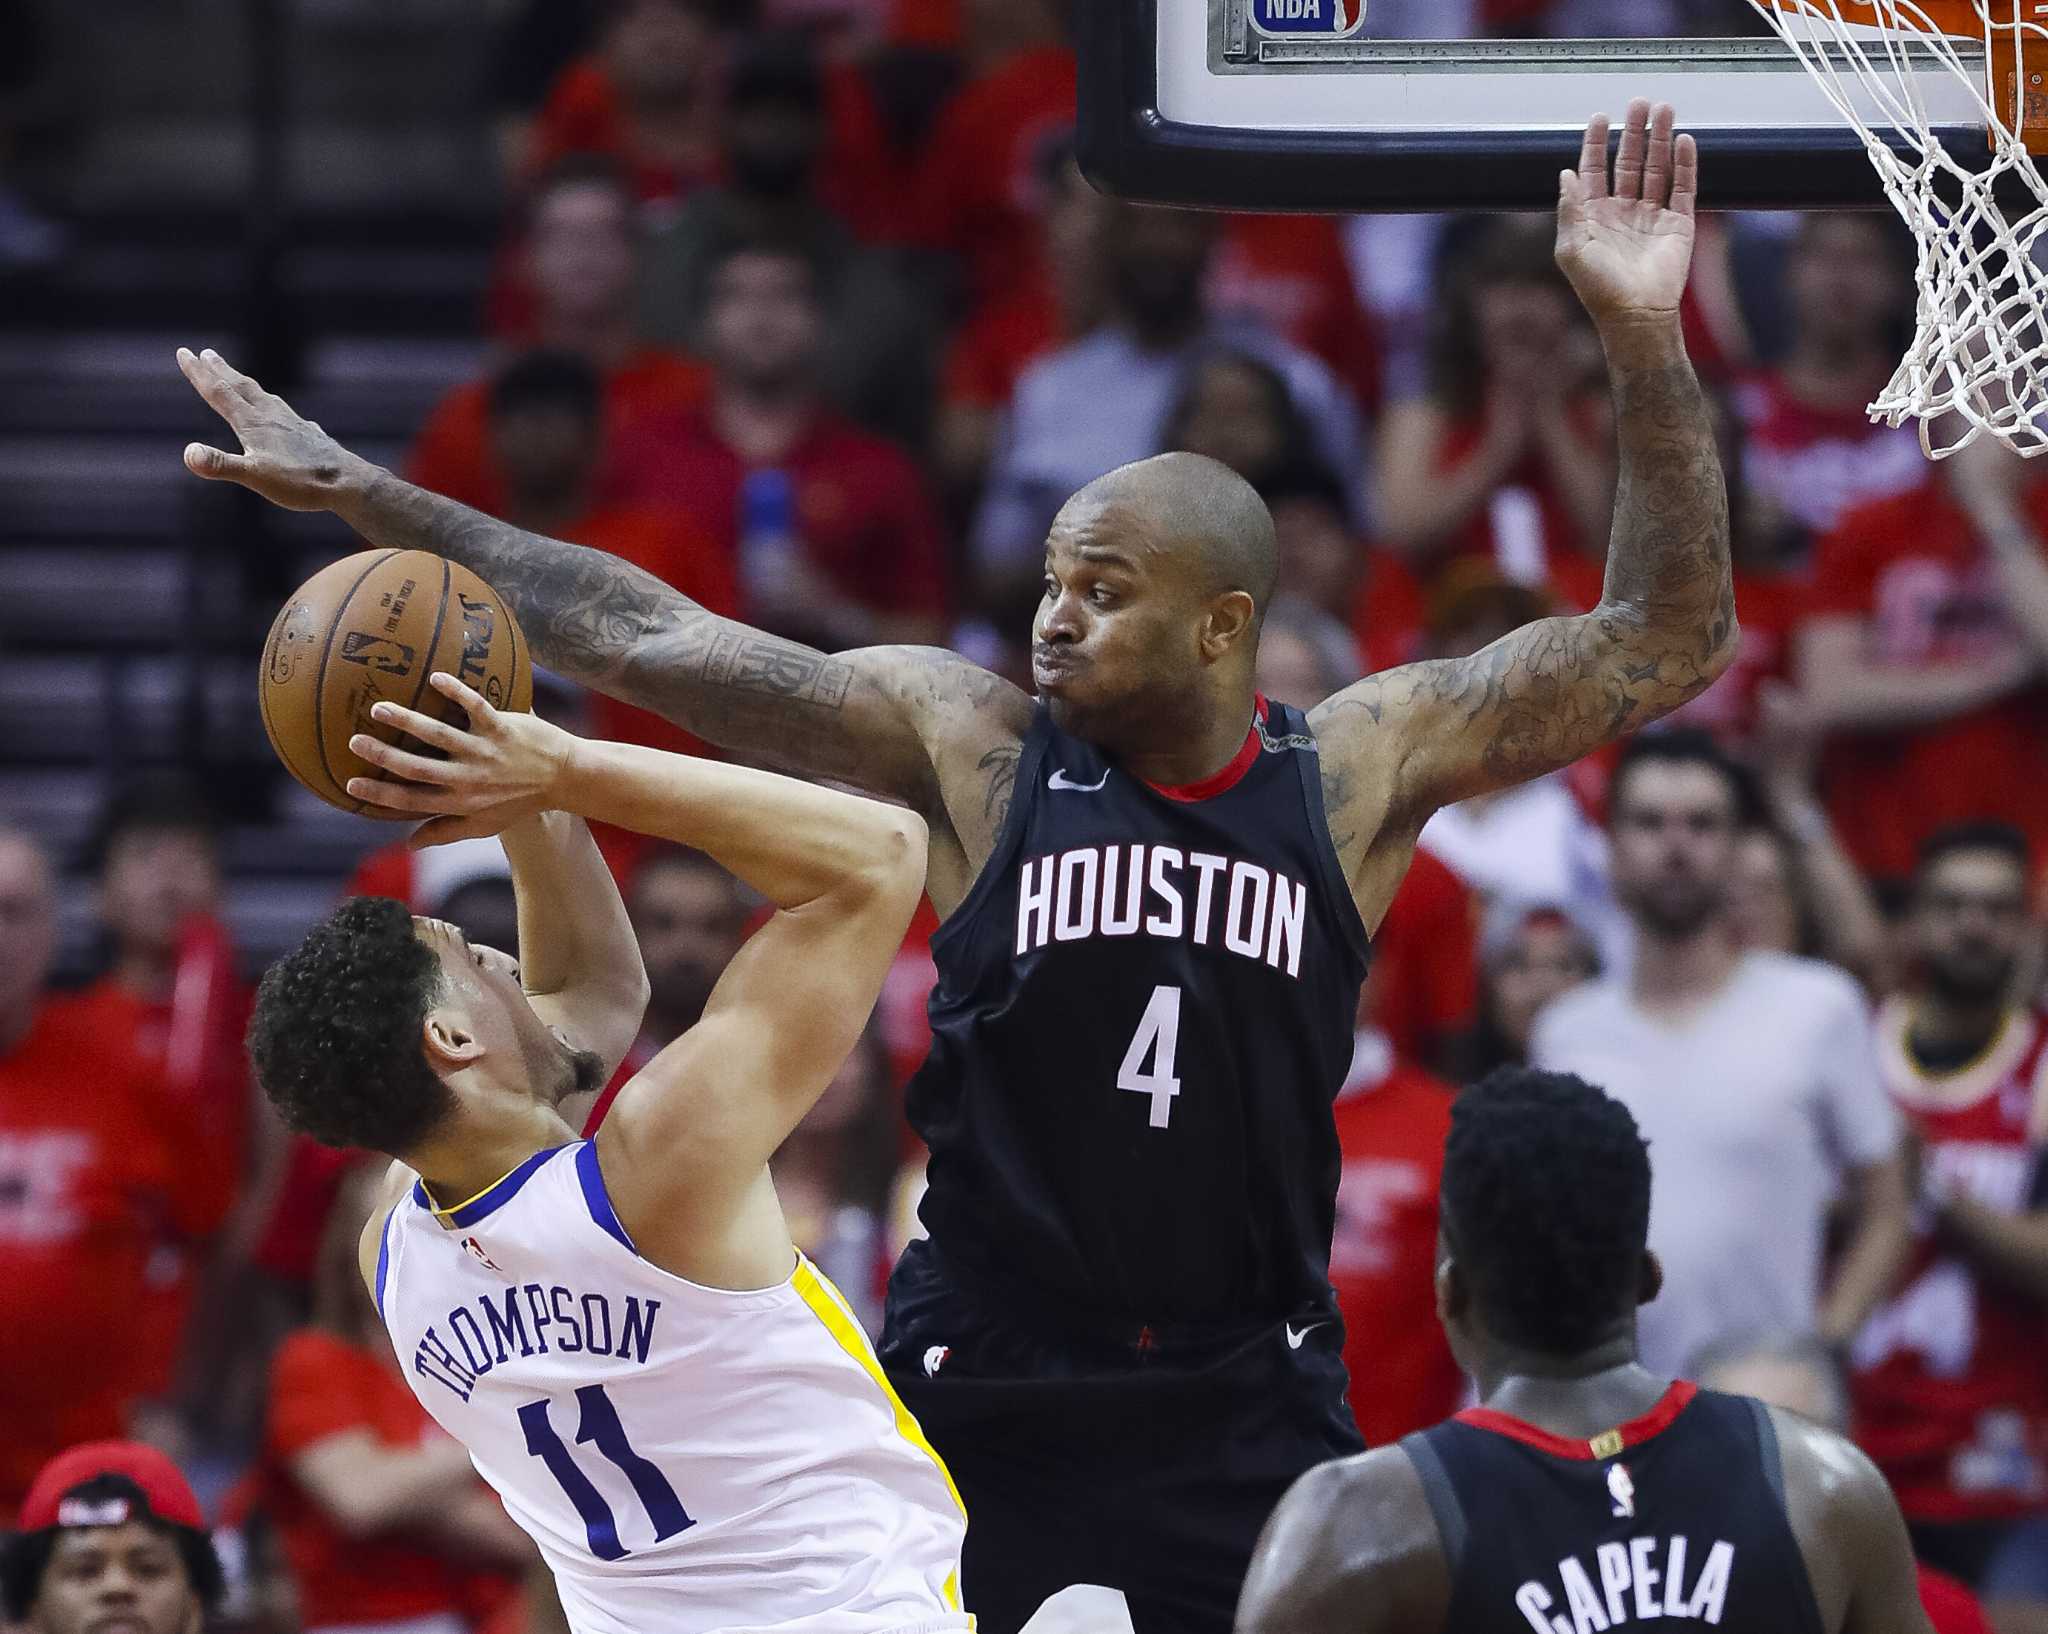 Former Suns forward P.J. Tucker agrees to deal with Houston Rockets